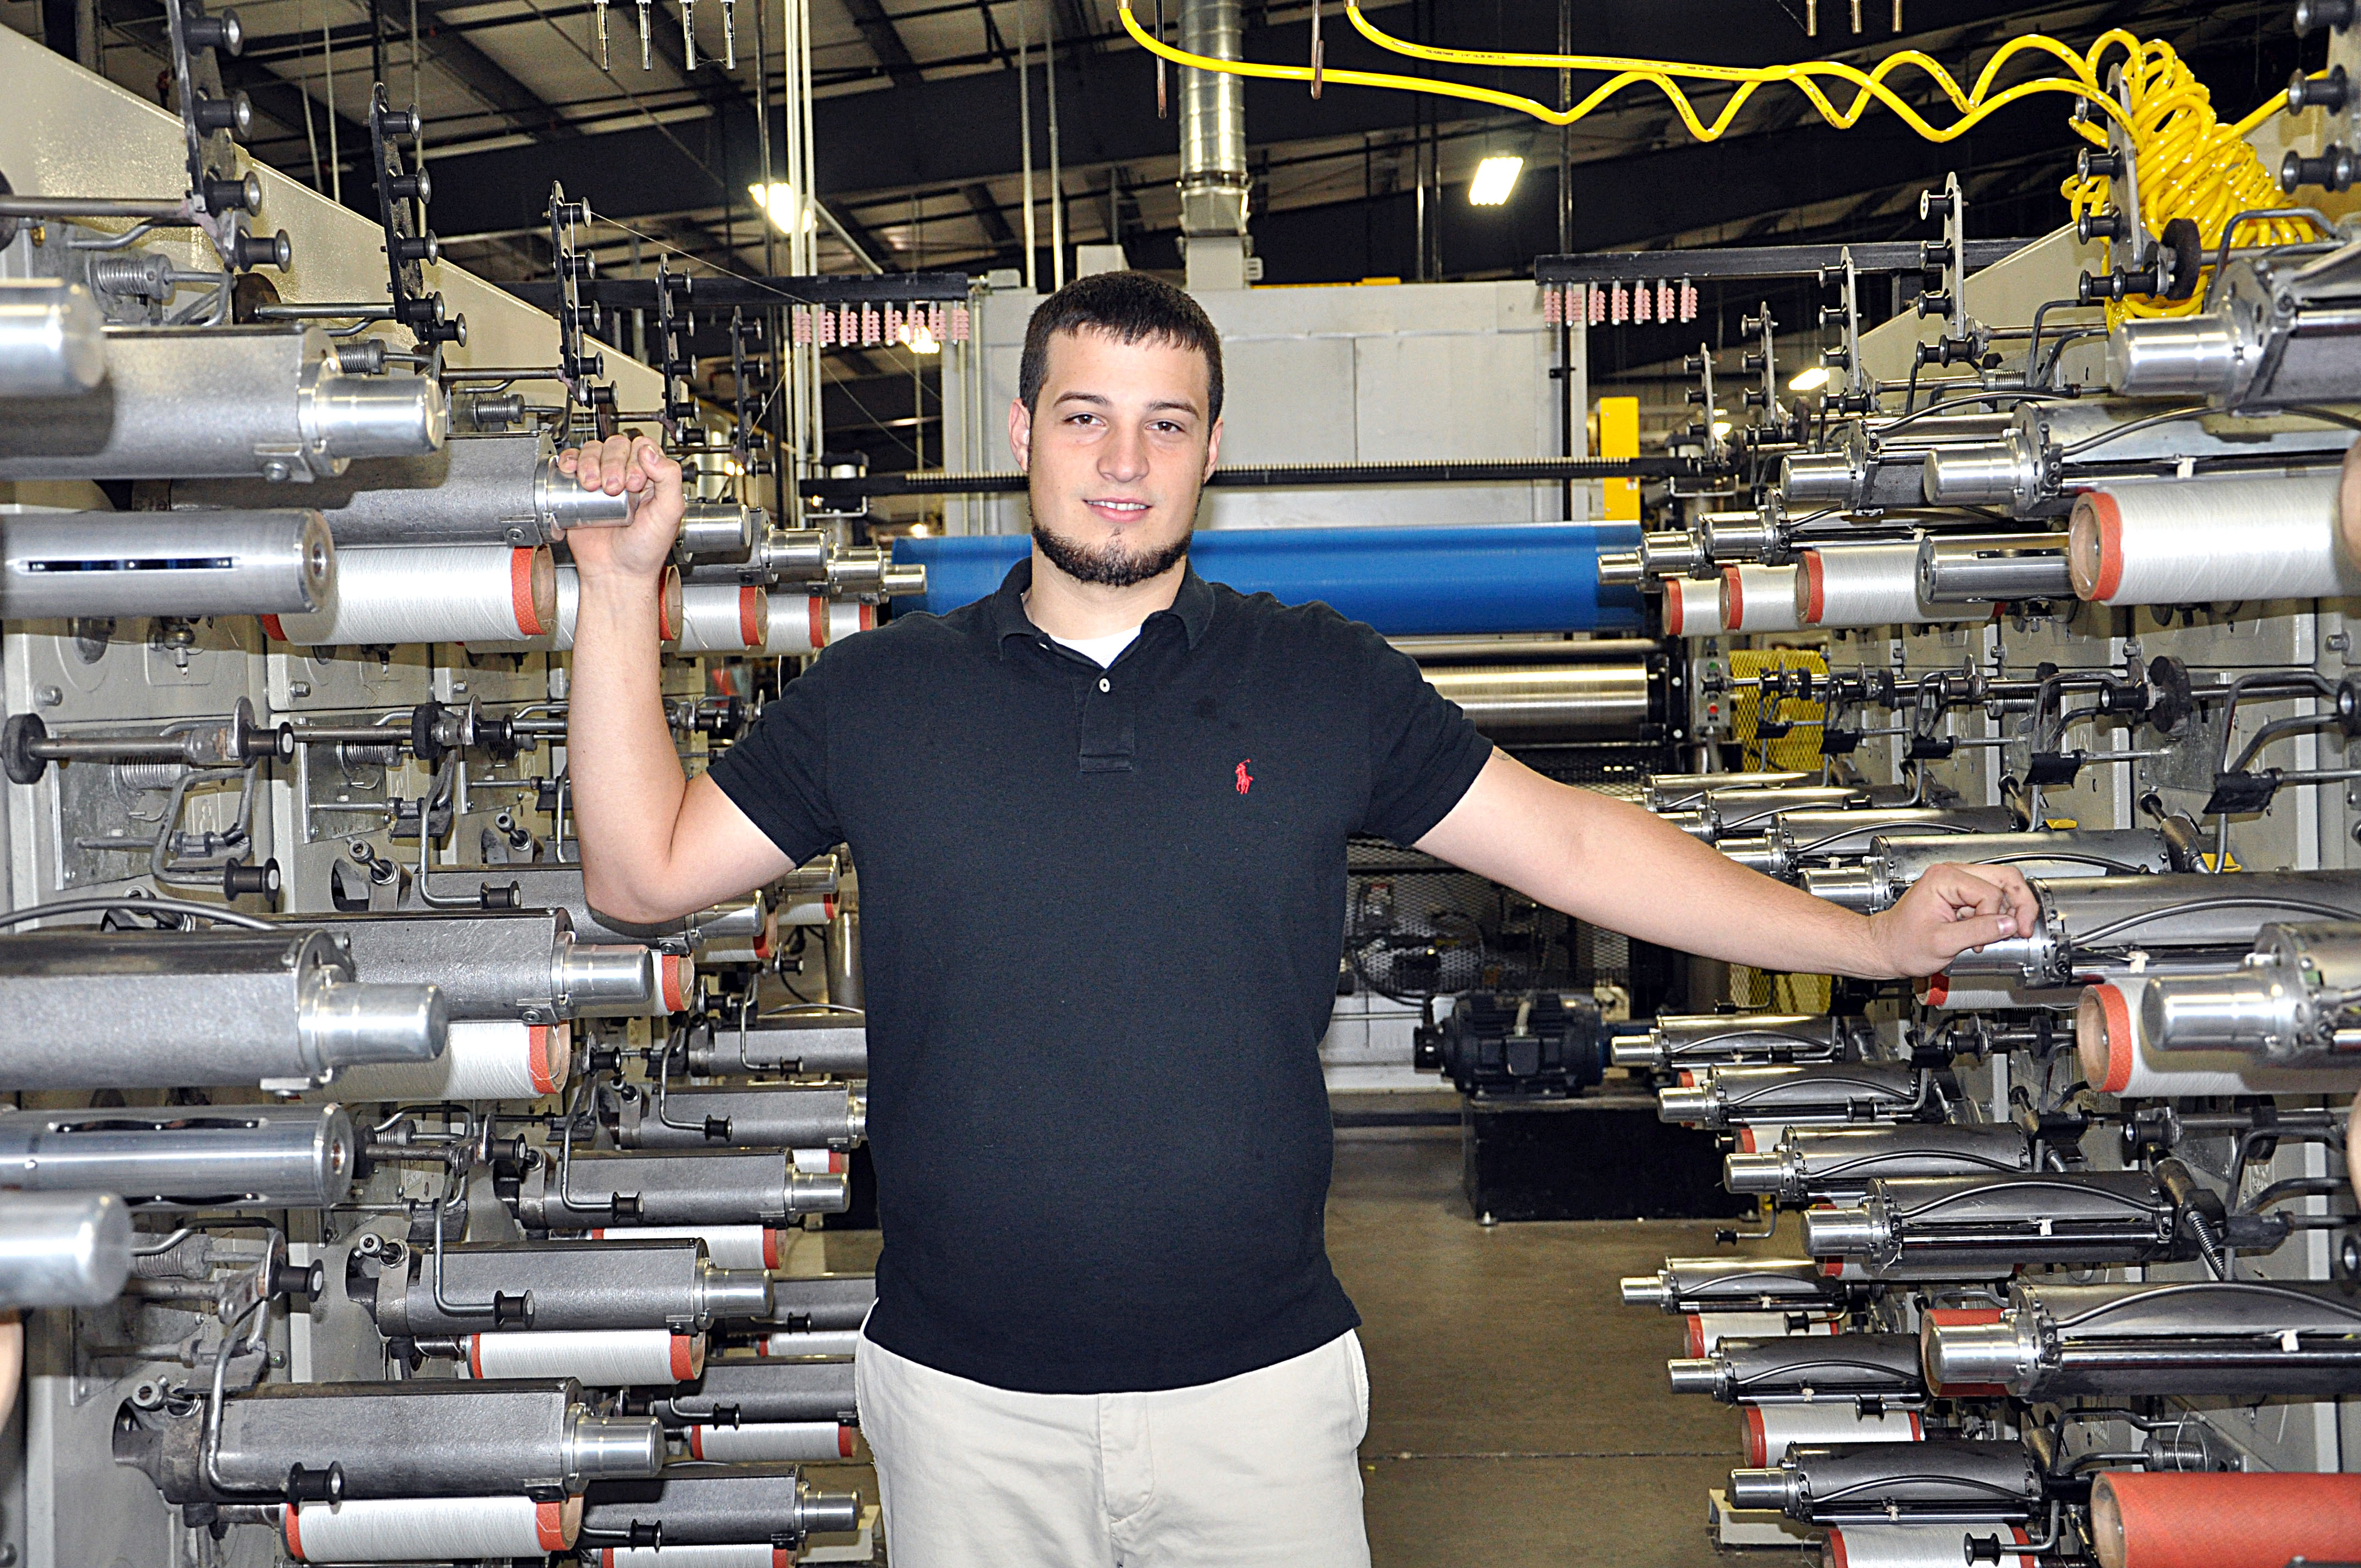 Service Thread employee Jordan Fournier stands with machinery at the company.